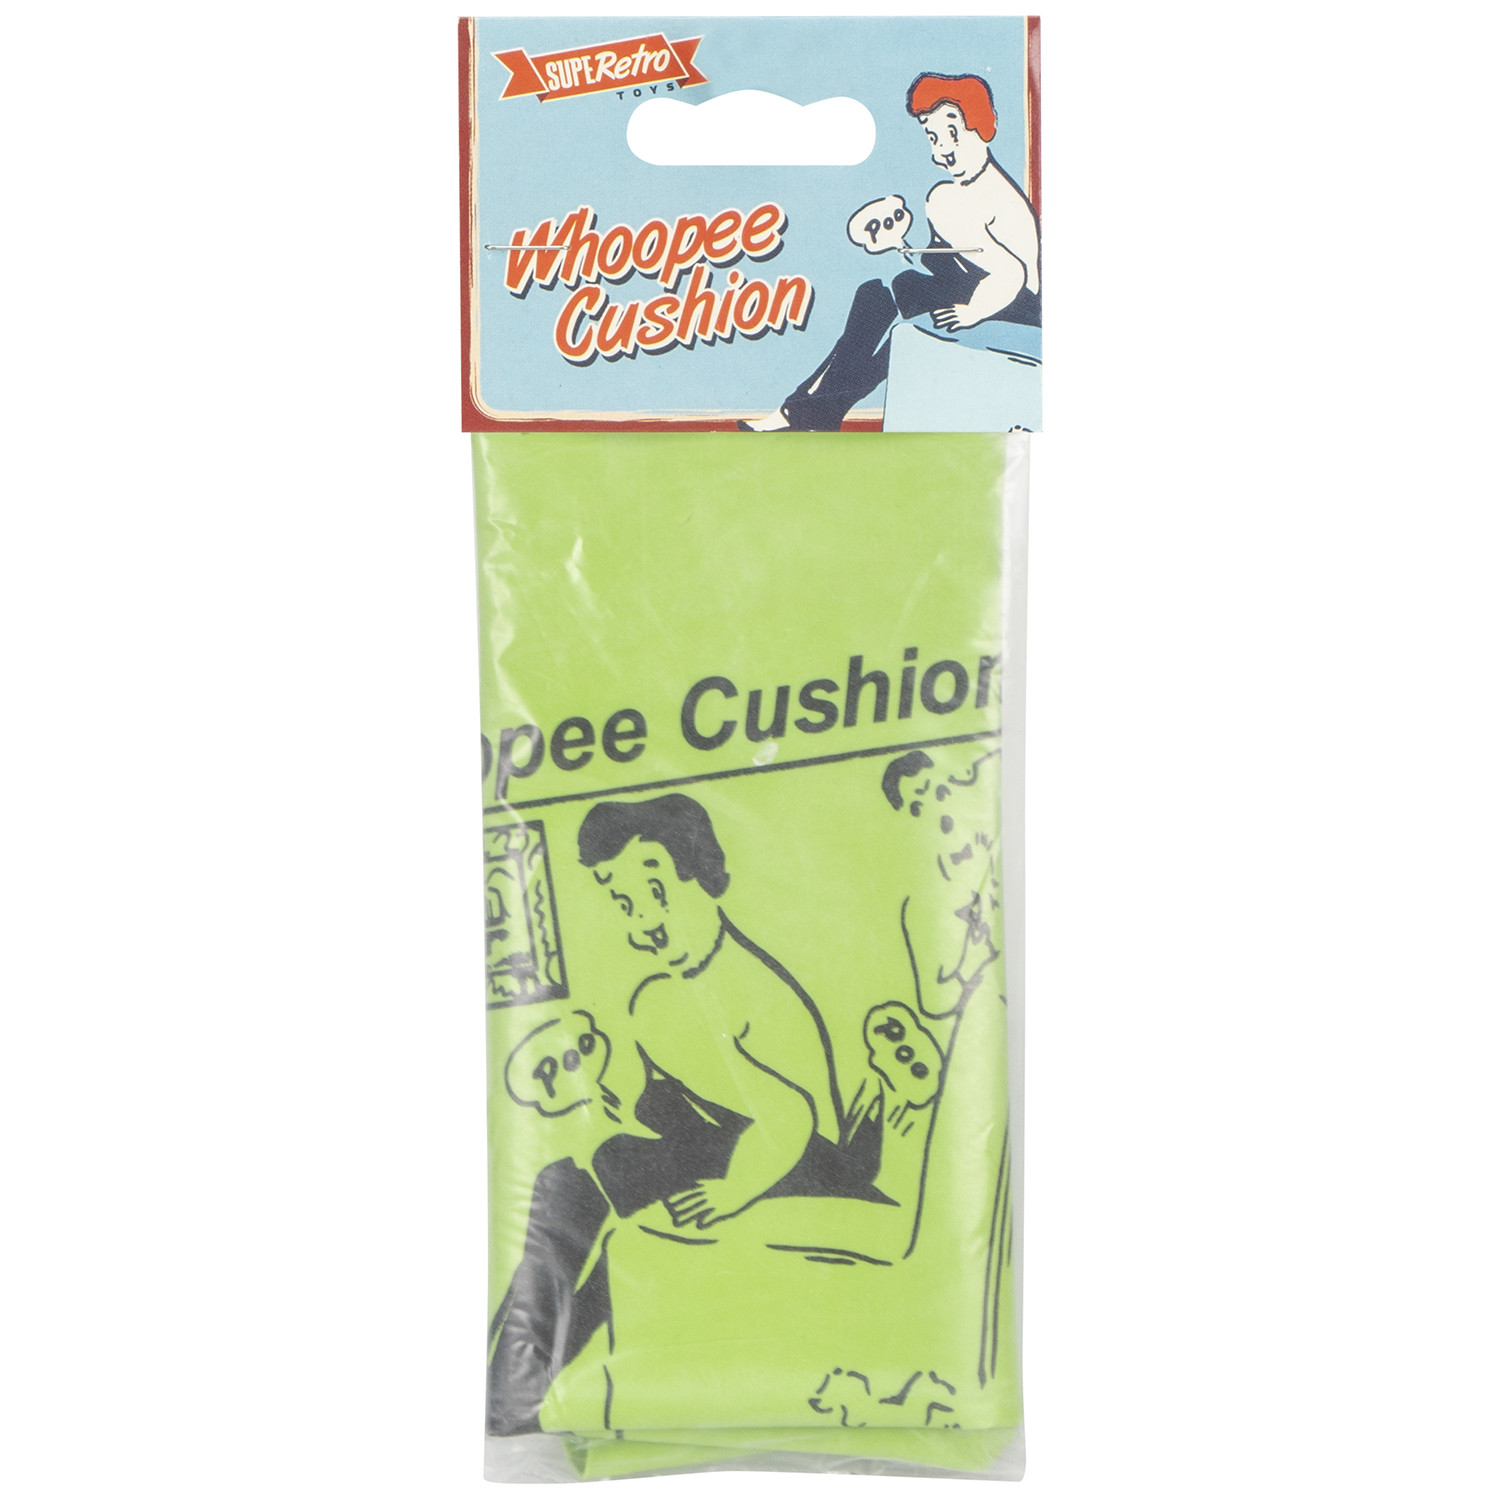 Single Super Retro Whoopee Cushion in Assorted styles Image 2